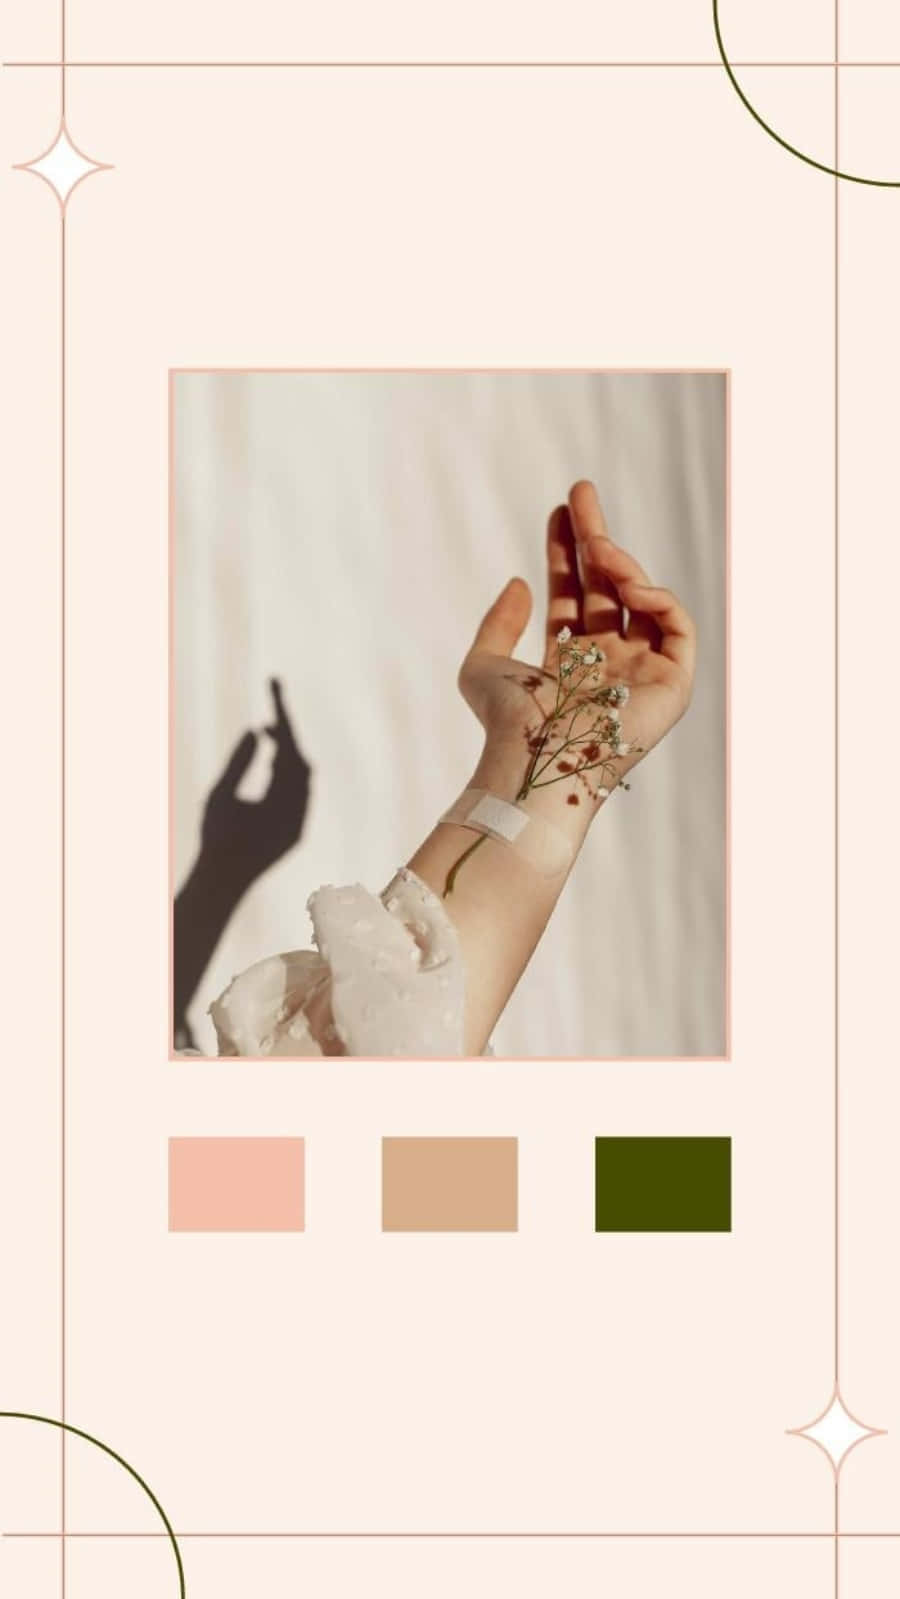 A woman's arm holding a flower, with a pink, green and brown color palette. - Nails